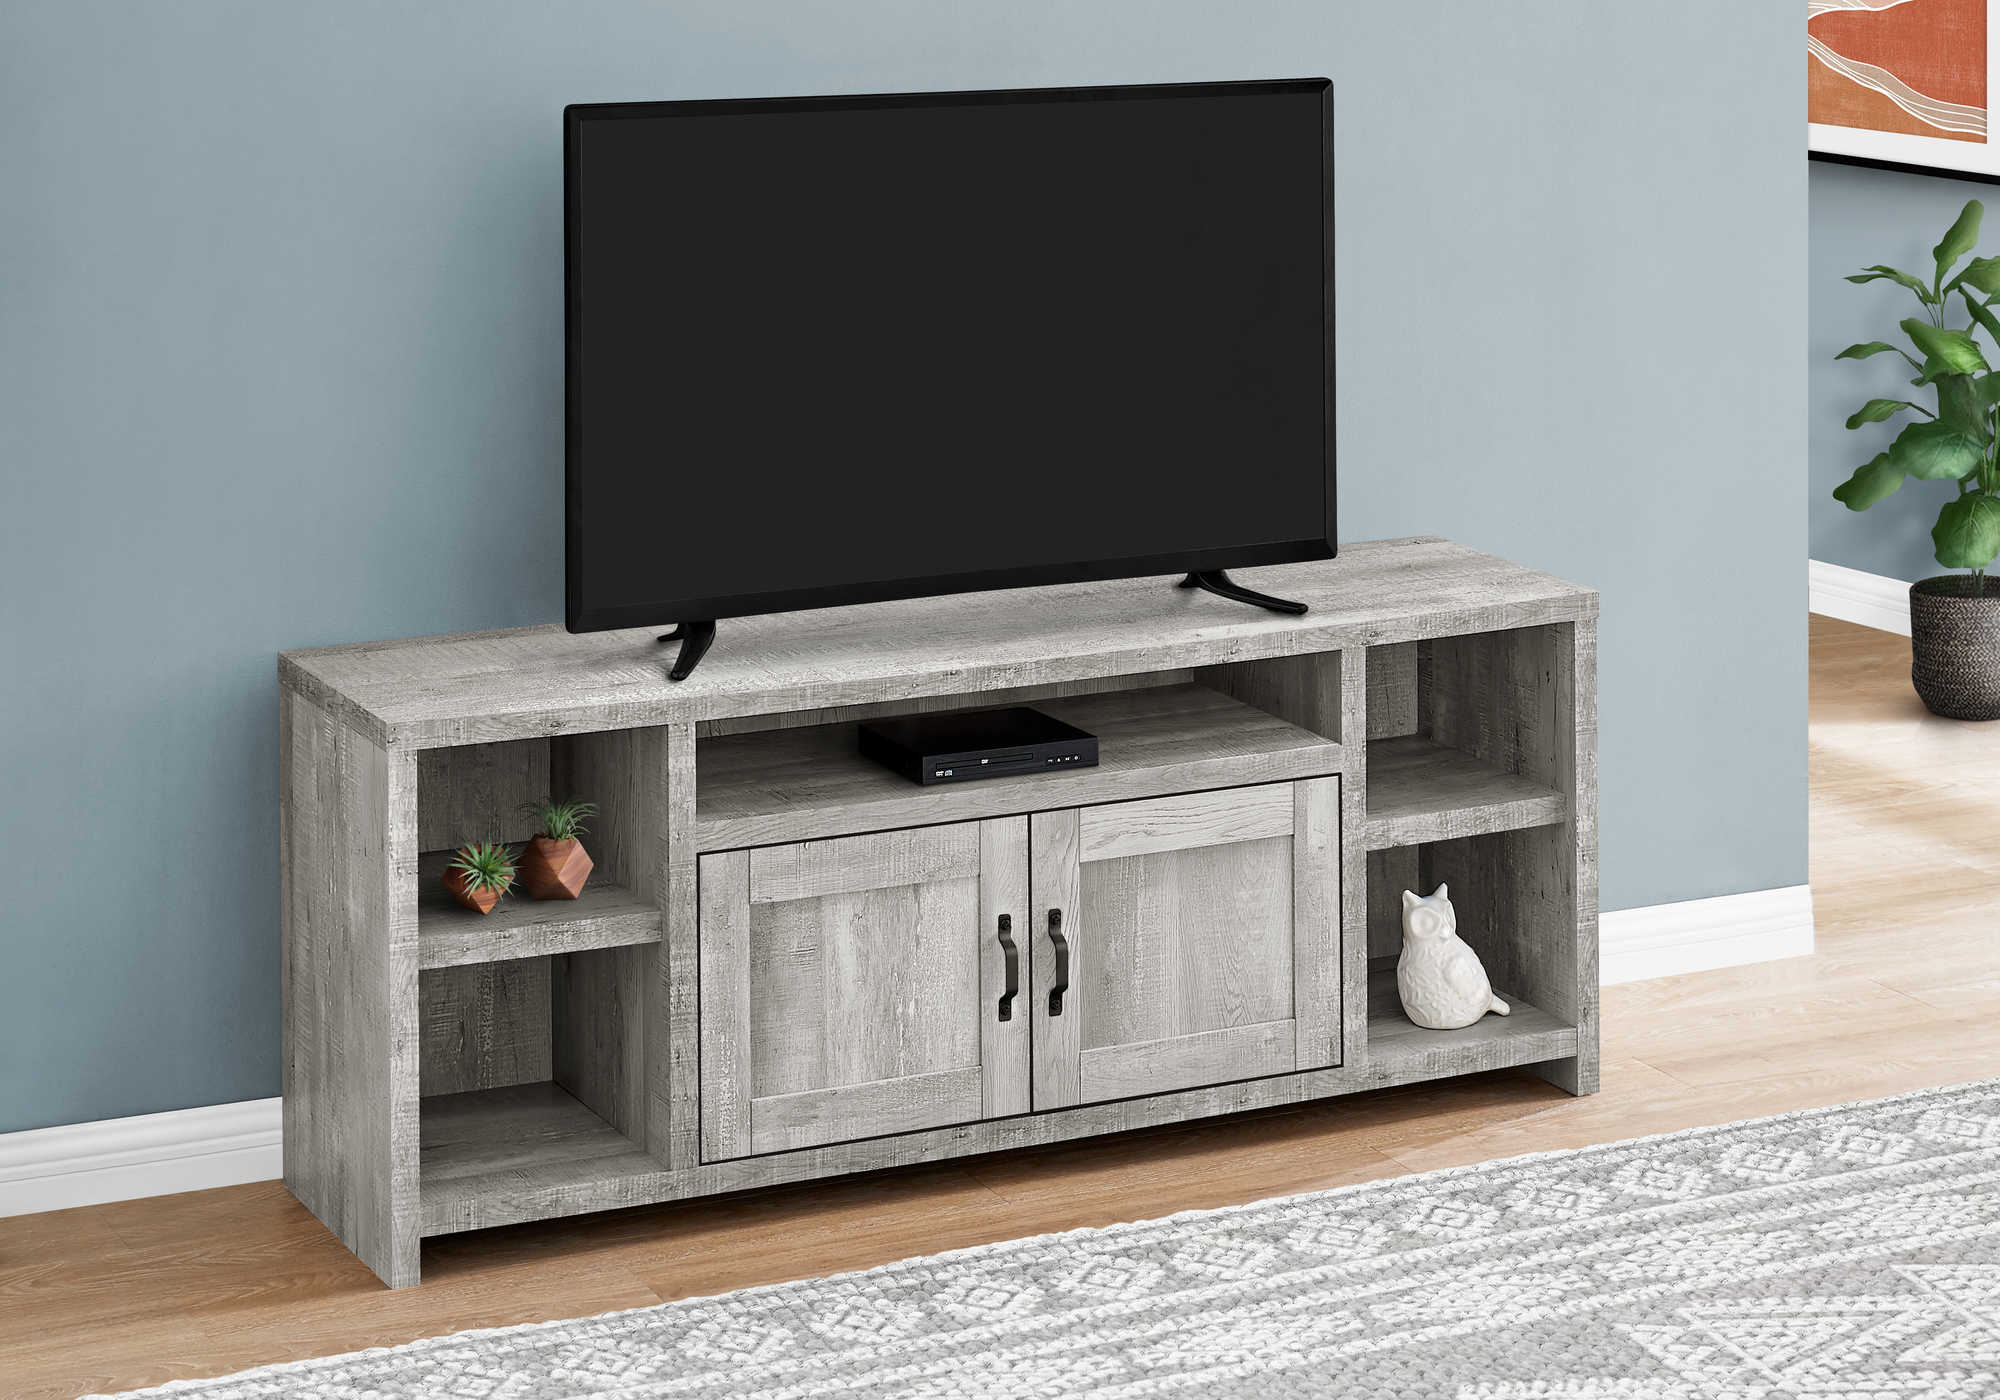 TV STAND - 60"L / GREY RECLAIMED WOOD-LOOK